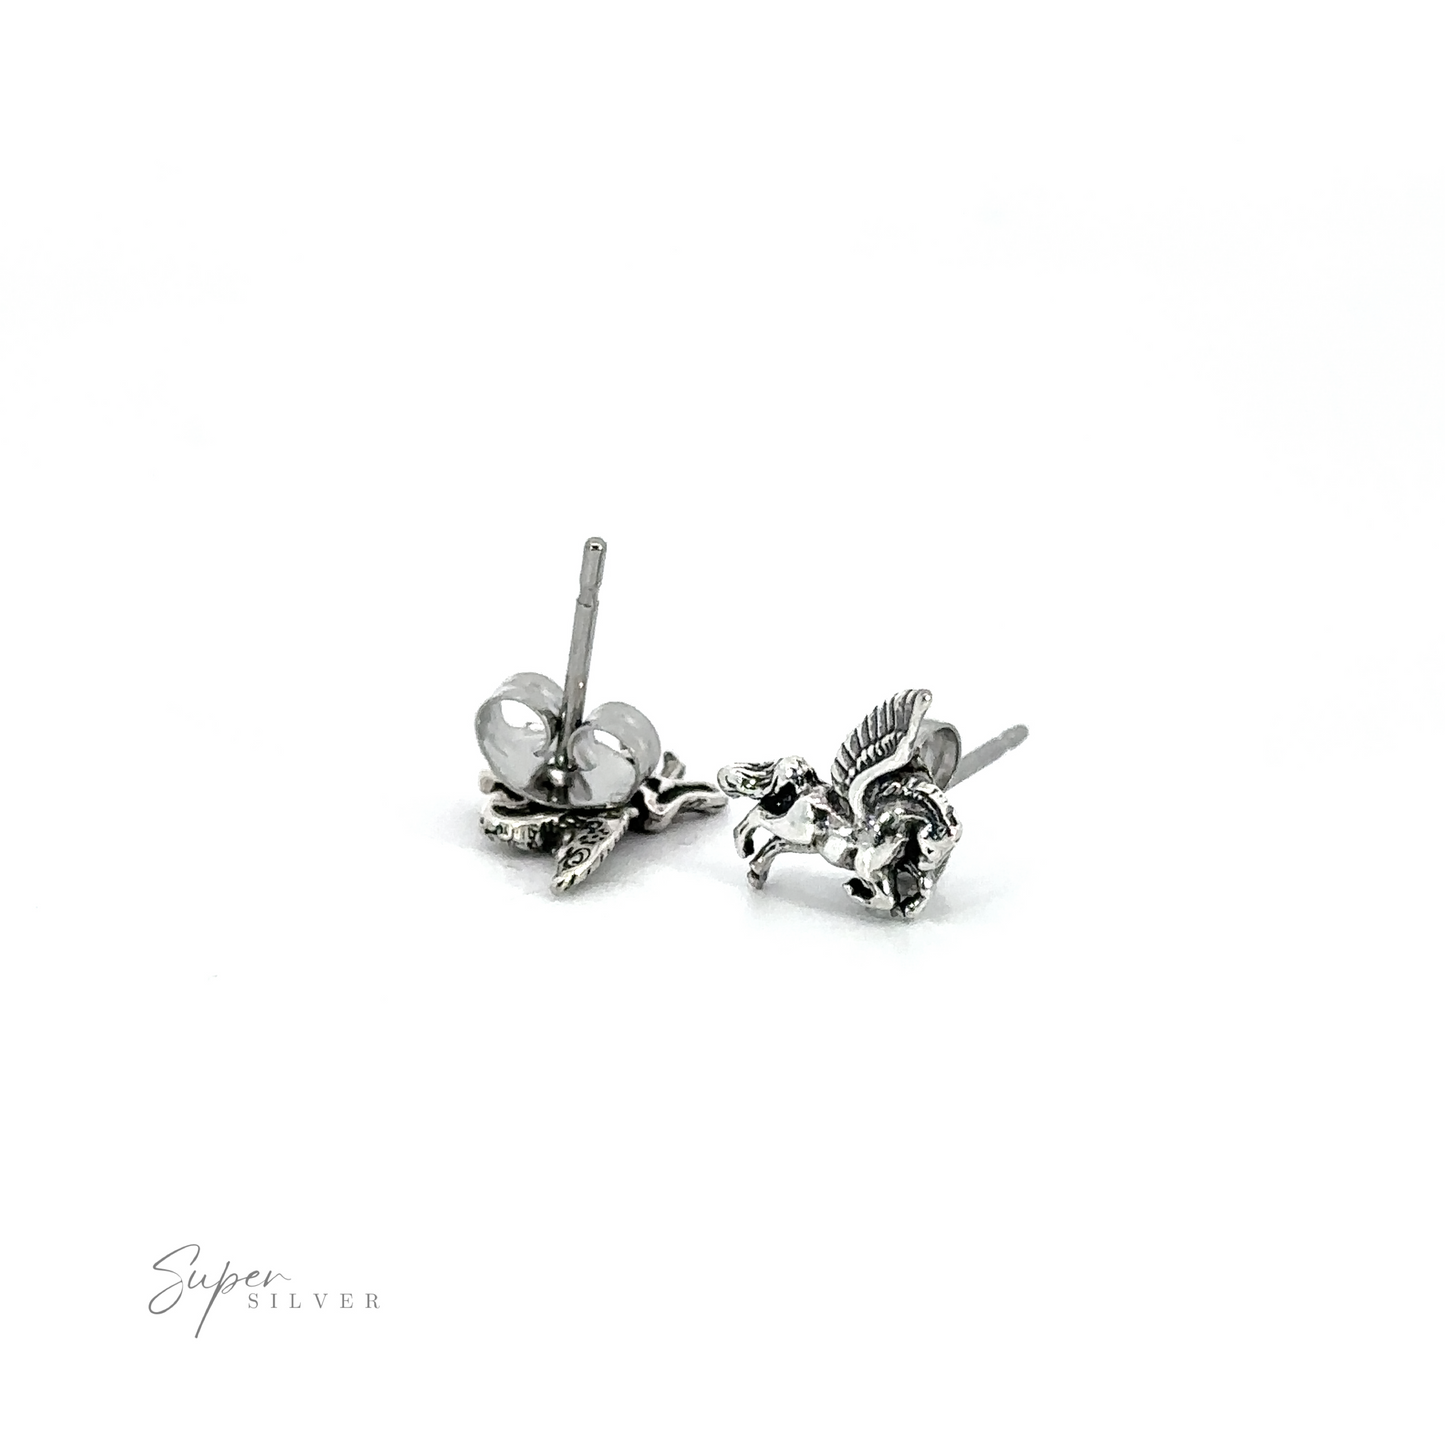 A pair of Pegasus Studs on a white background.